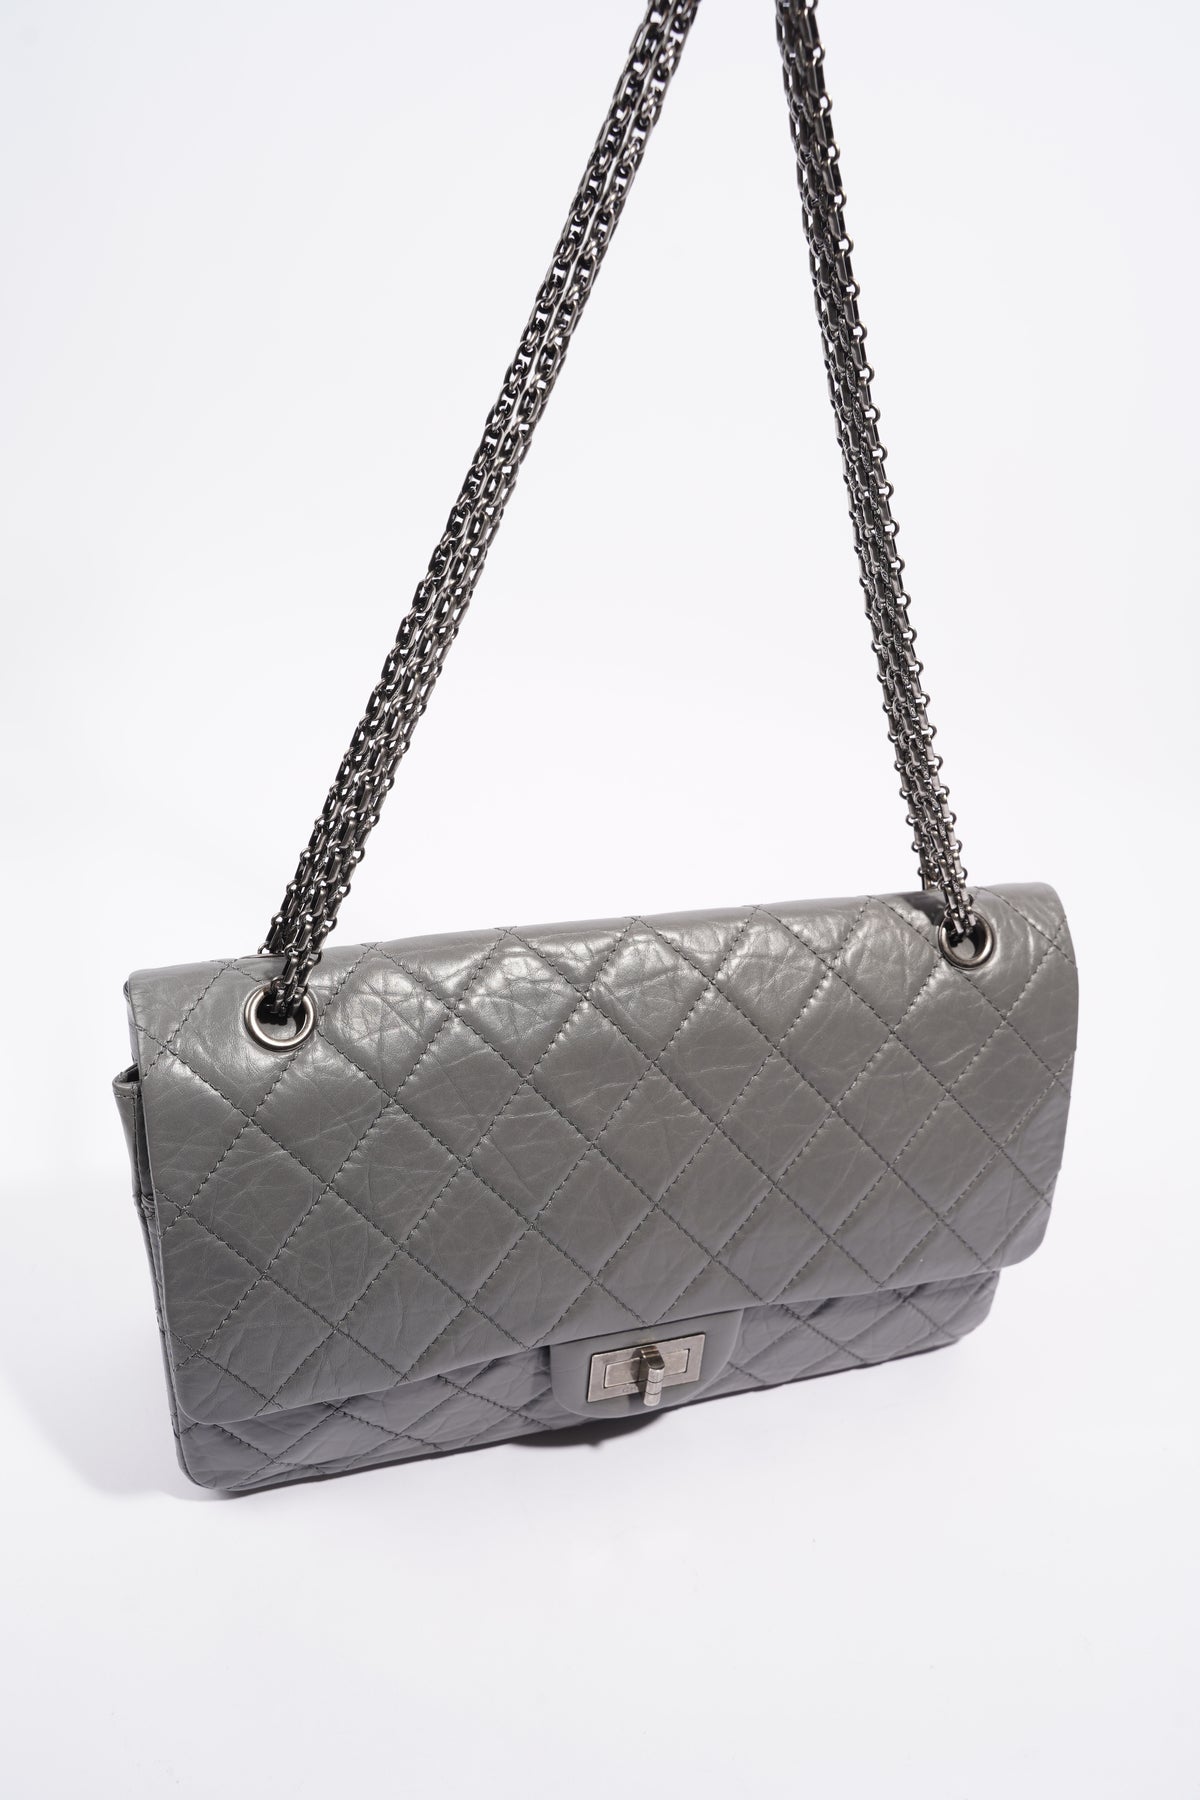 Chanel Womens 2.55 Lambskin Classic Flap Bag Grey – Luxe Collective